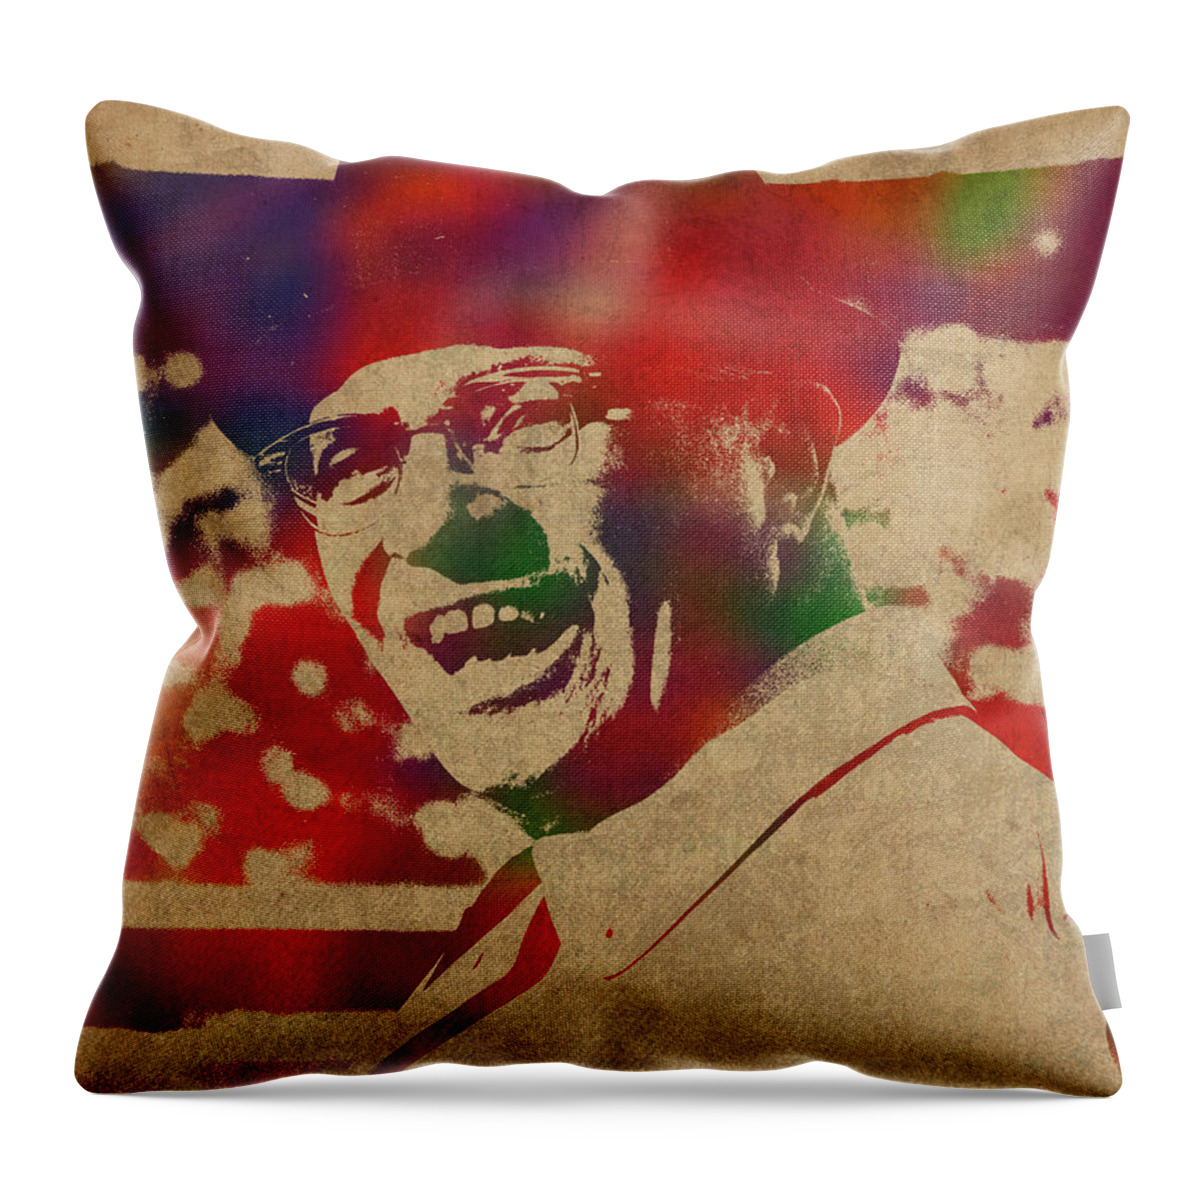 Coach Throw Pillow featuring the mixed media Coach Vince Lombardi Watercolor Portrait by Design Turnpike